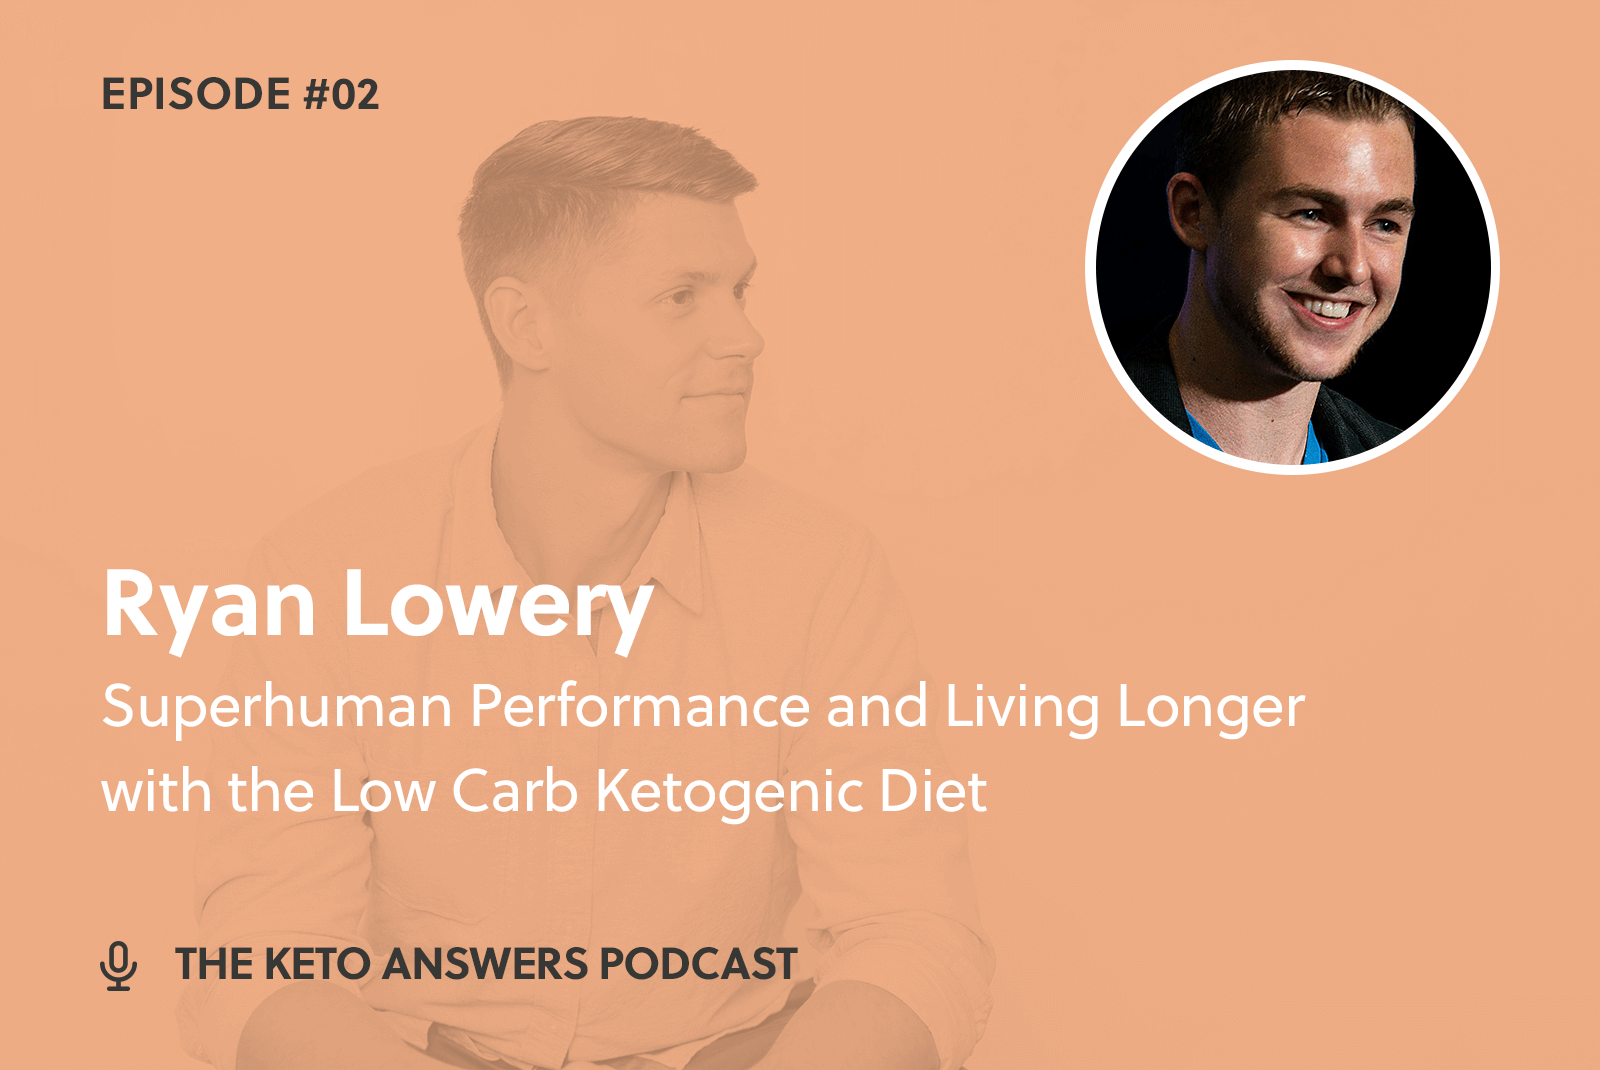 002: Superhuman Performance and Living Longer with the Low Carb Ketogenic  Diet - Ryan Lowery - Dr. Anthony Gustin